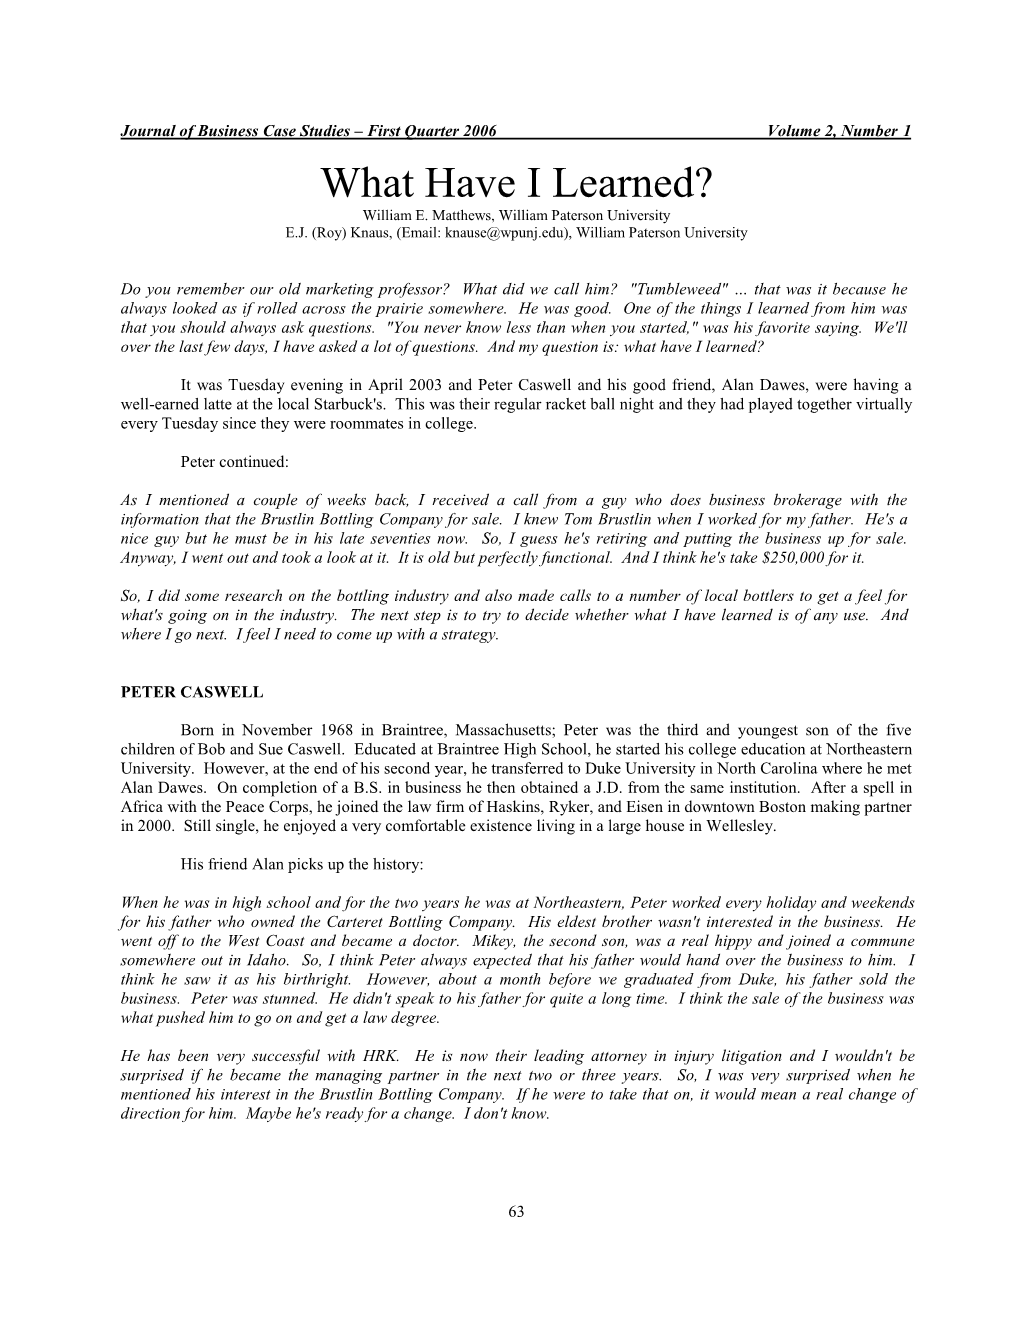 What Have I Learned? William E